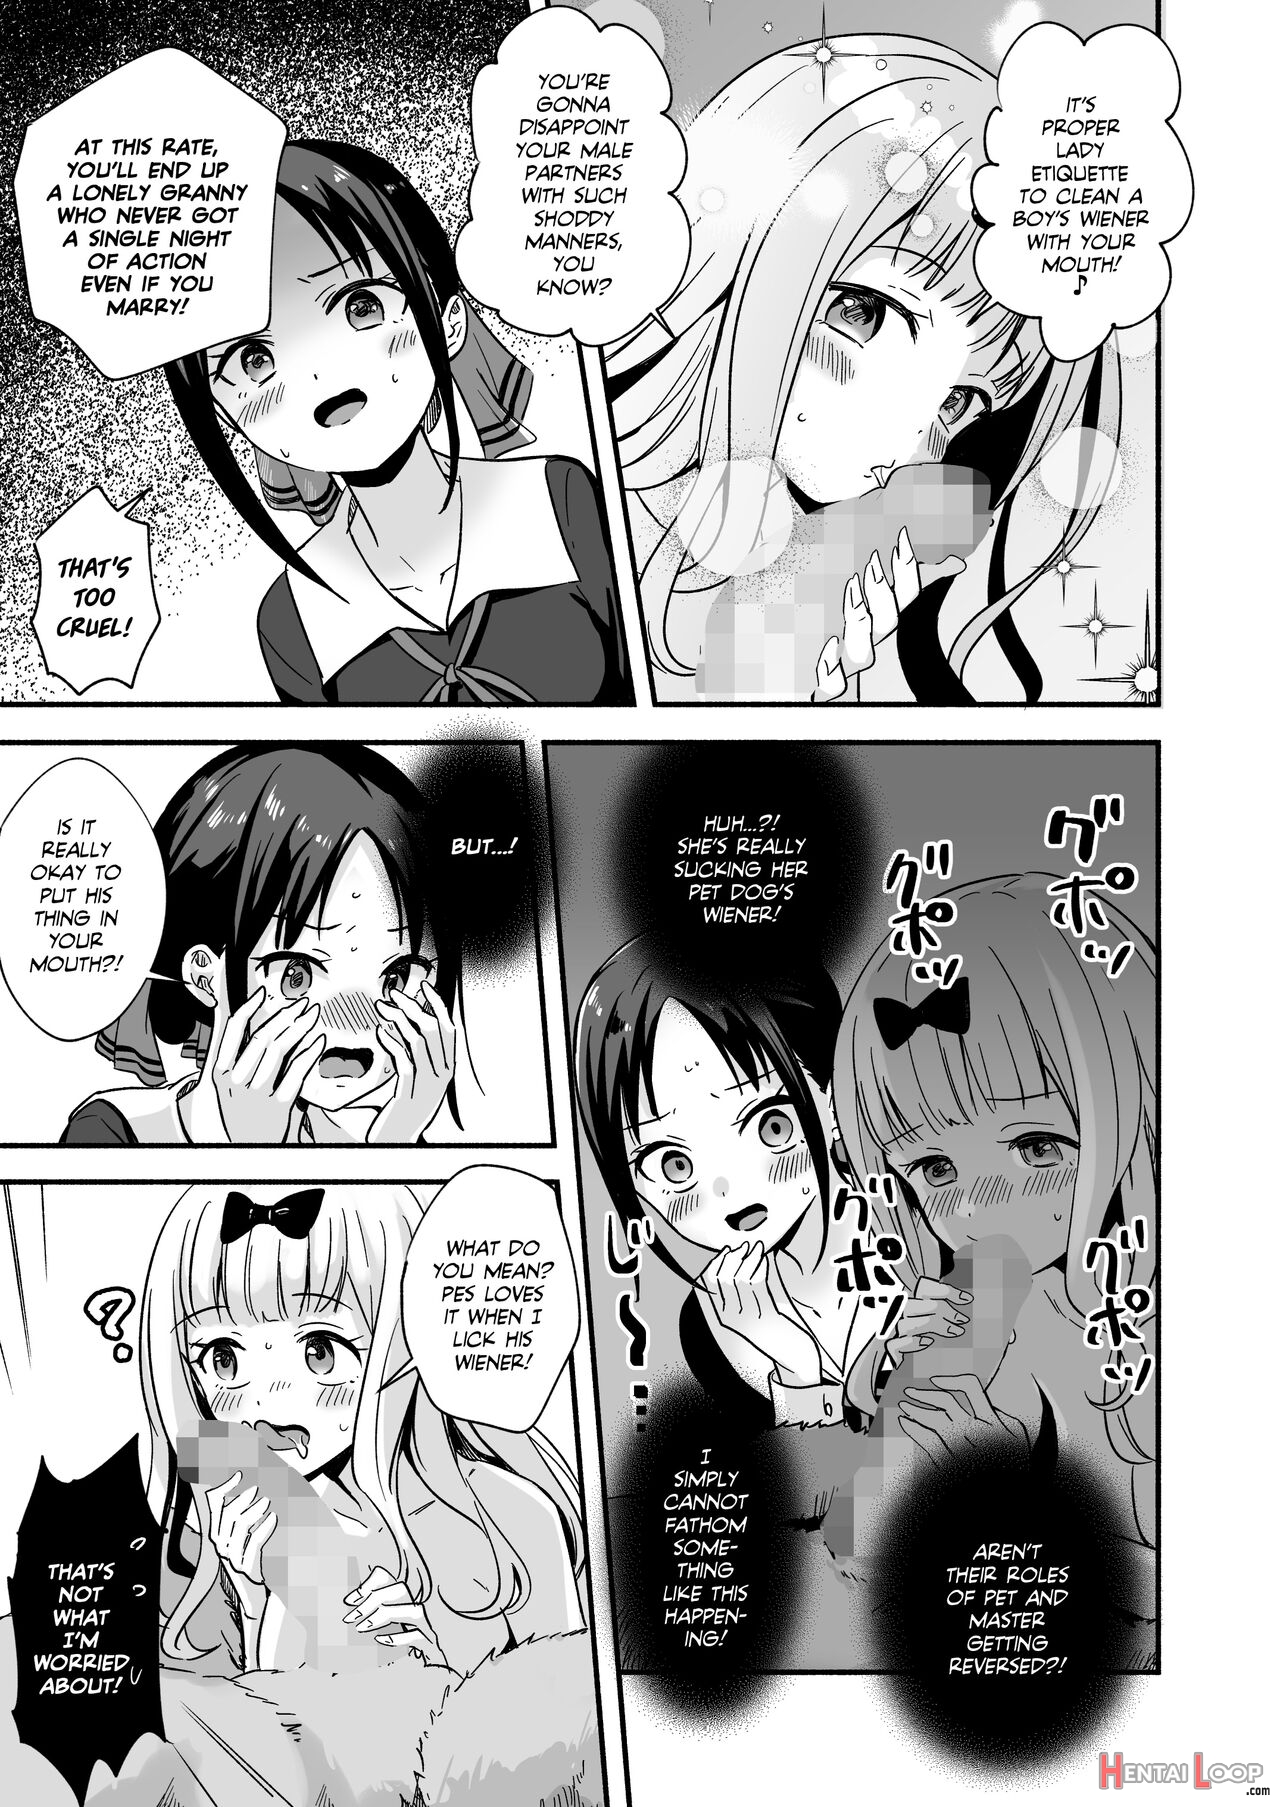 Kaguya-san Takes Care Of Pes's Sexual Urges! page 13